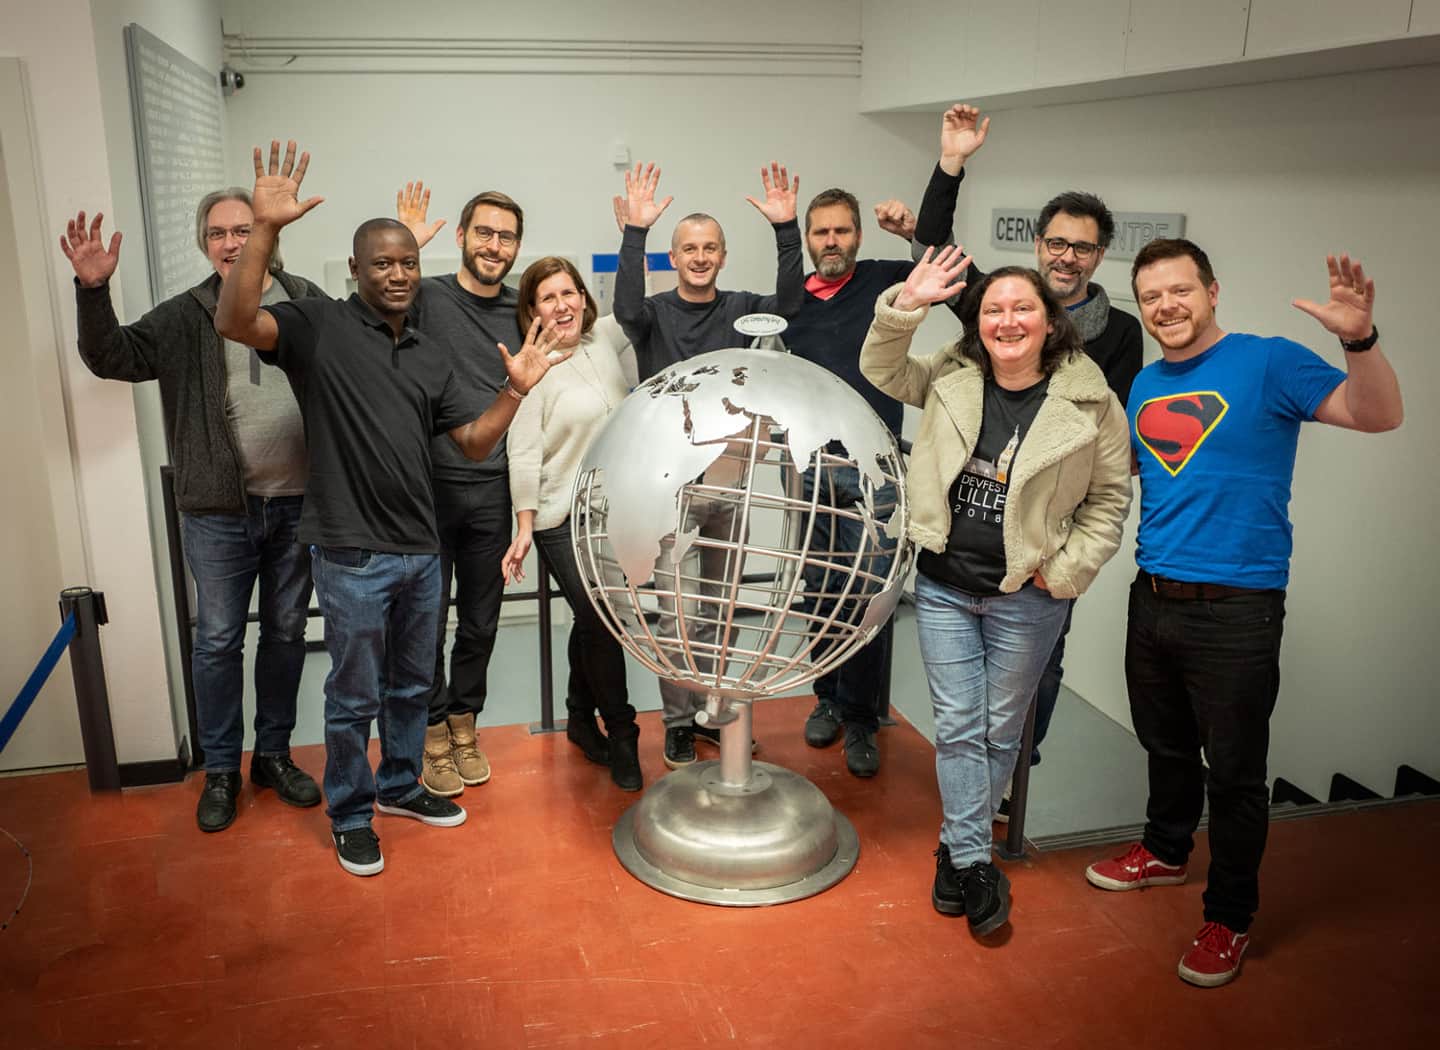 Two women and seven men stand behind a metallic sculpture of the globe showing the continents, many of the people ahve their hands raised